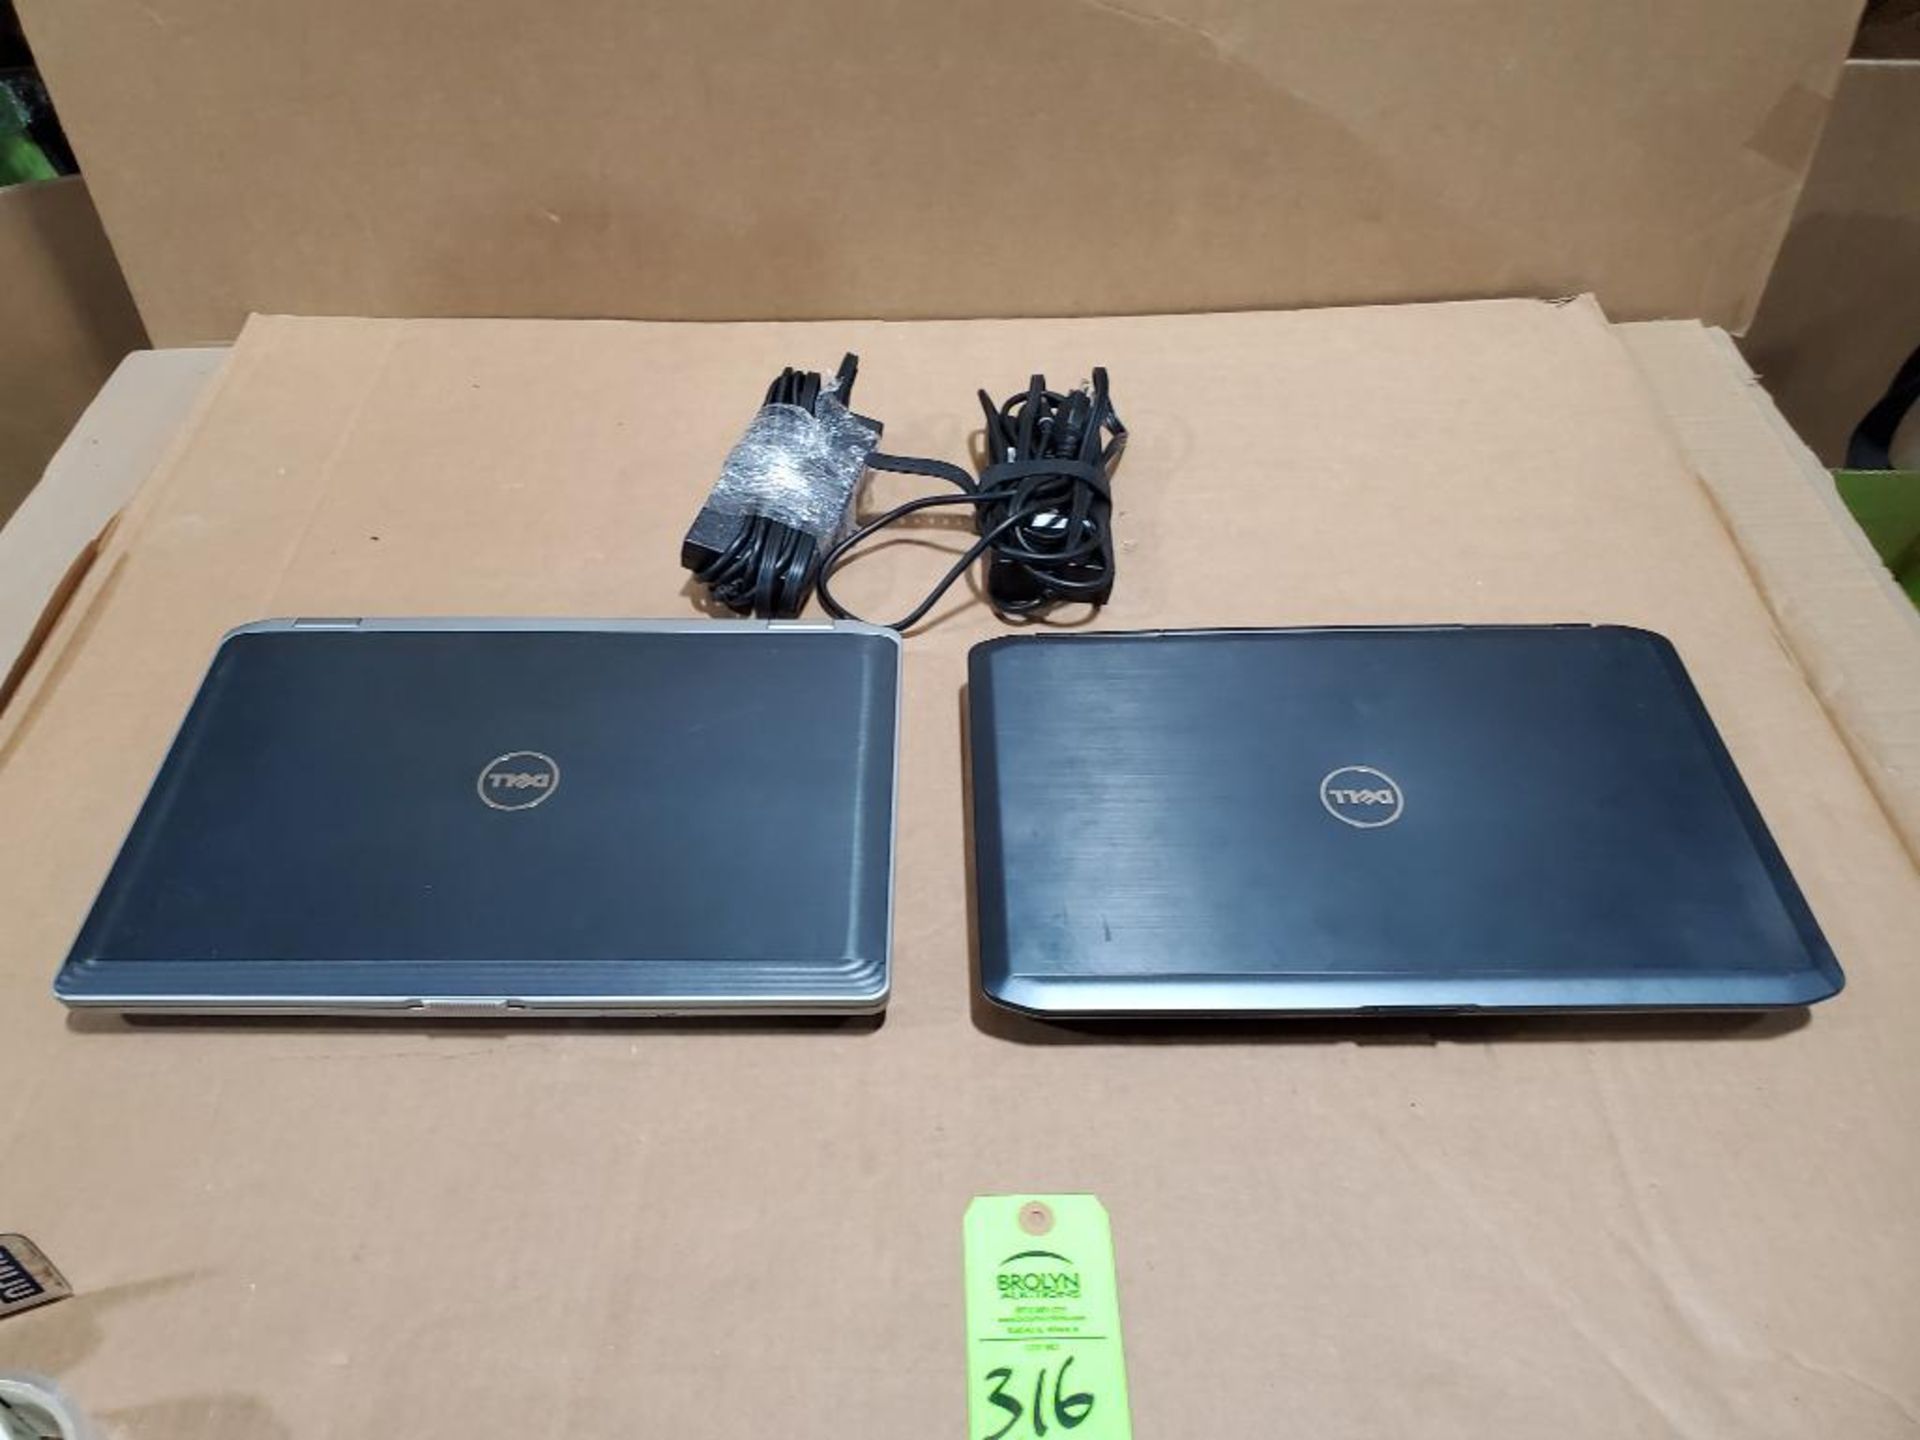 Qty 2 - Assorted Dell computers. (includes 2 power cords)